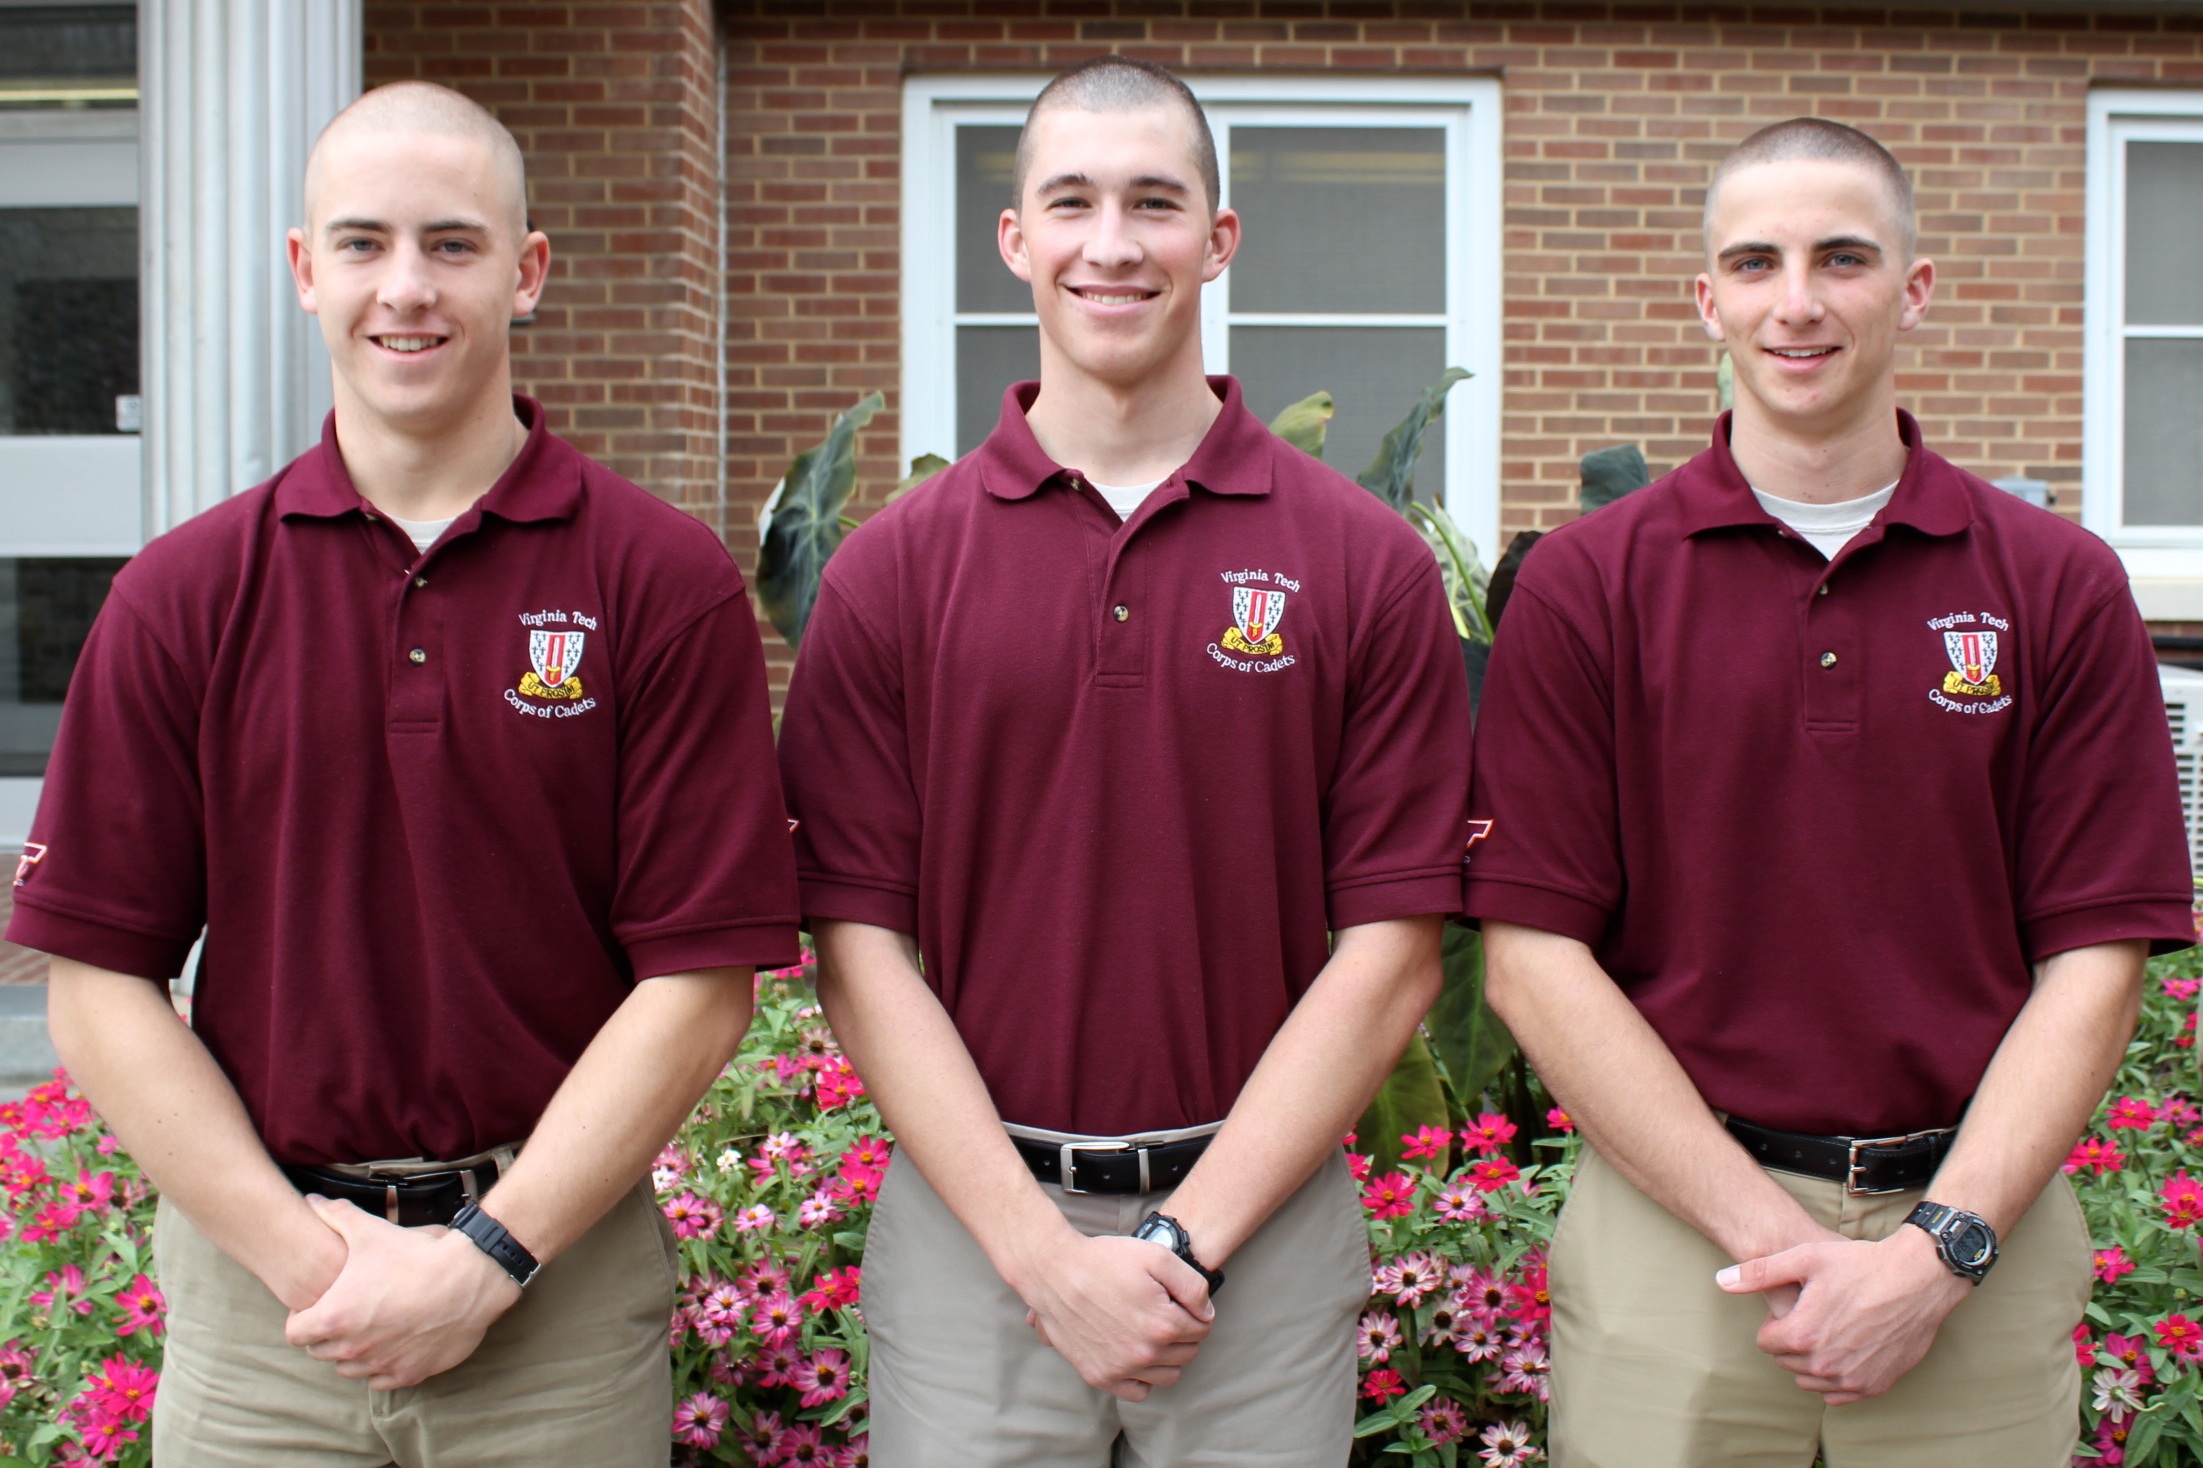 From left to right are Cadets Andrew Bergman, Richard Daum, and Andrew Greenwood standing in front of Brodie Hall.